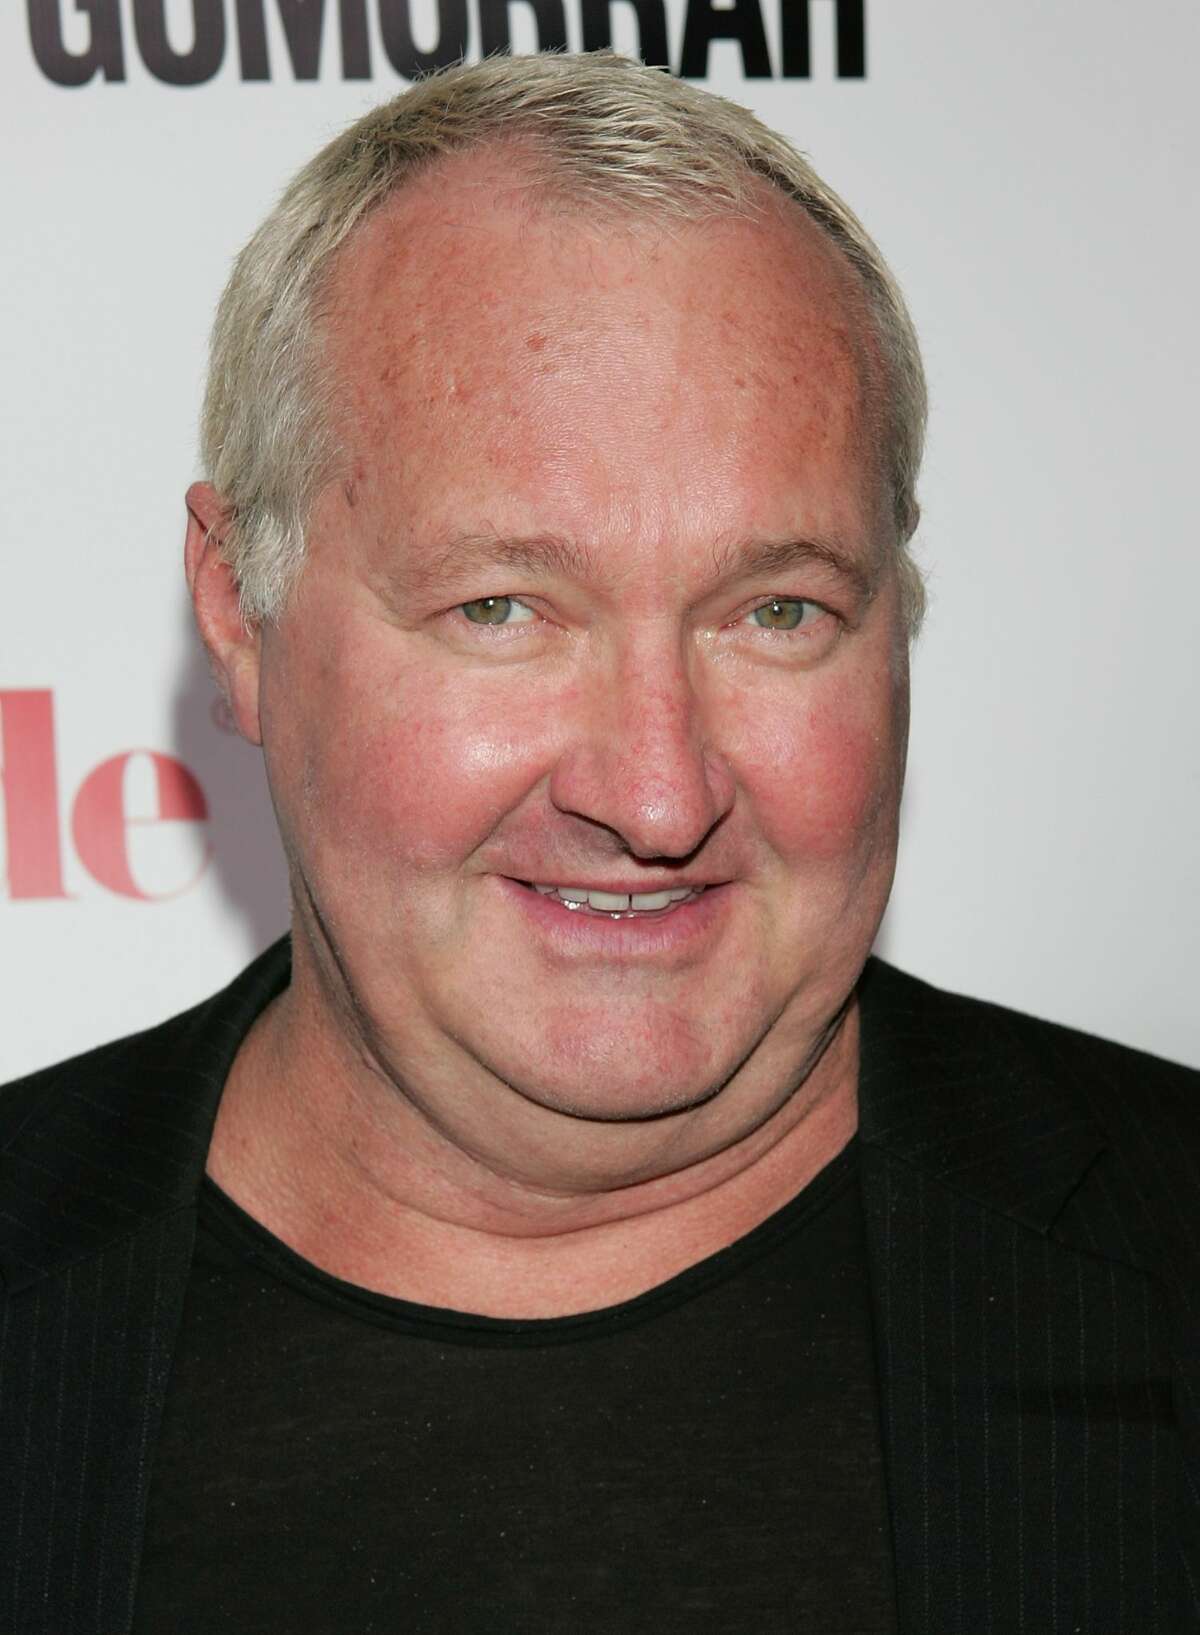 Randy Quaid from Houston, Texas Back in 2010, the Academy Award- nominated actor and his wife were seeking asylum in Canada amid felony and burglary charges in California. The Quaids claimed in a note, "We are requesting asylum from Hollywood 'star whackers.'"